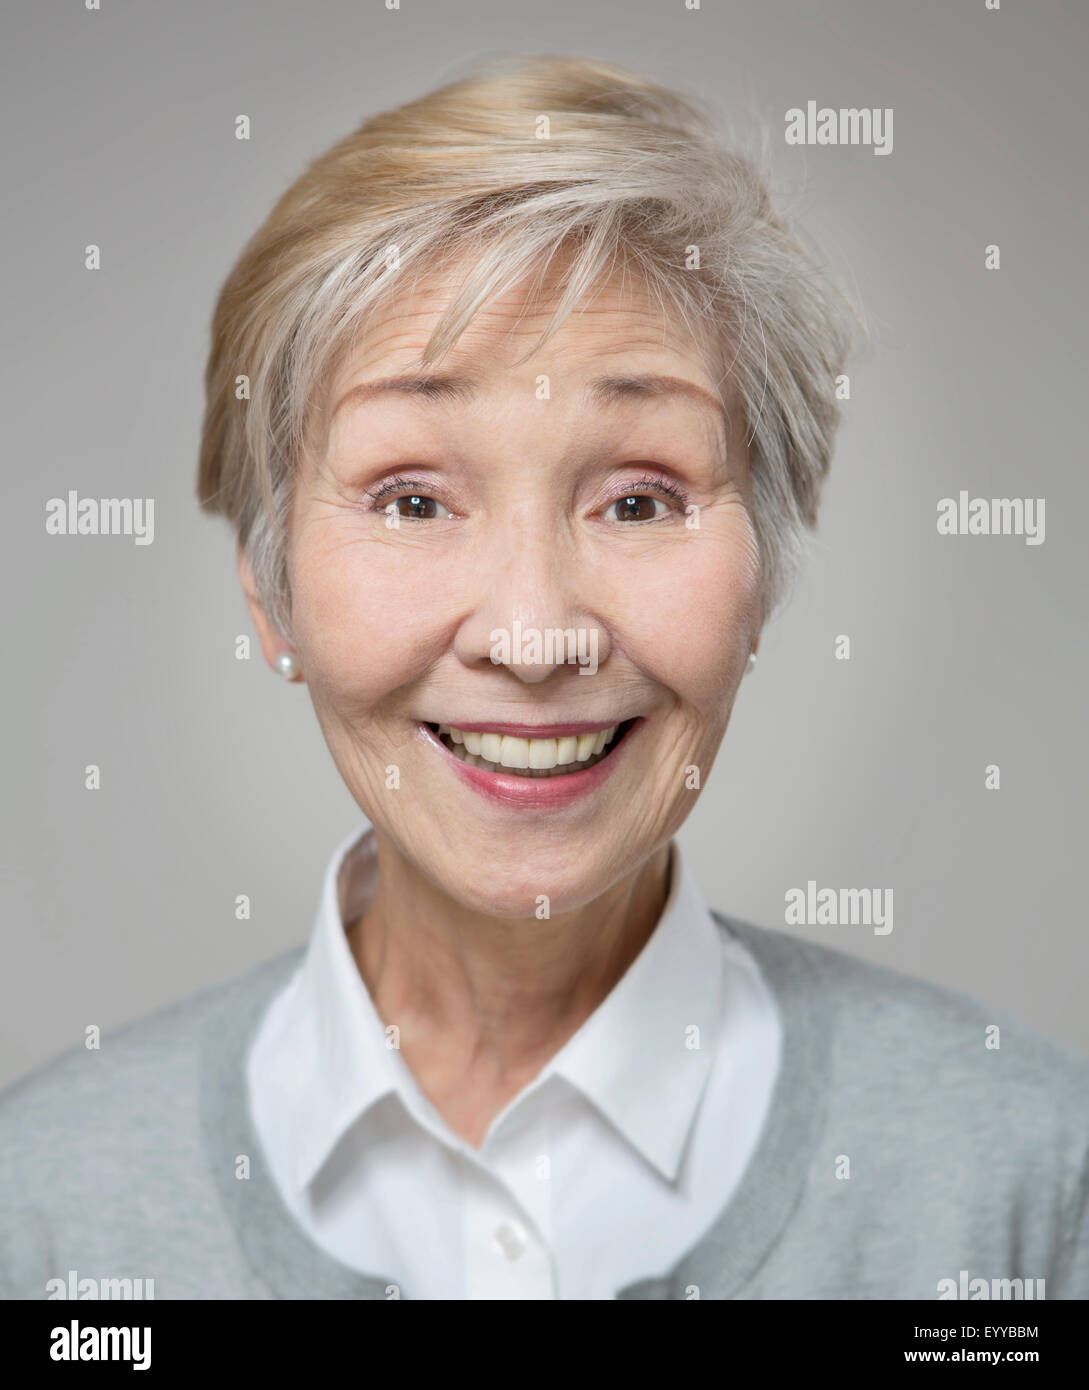 Close up of older Japanese woman smiling Banque D'Images